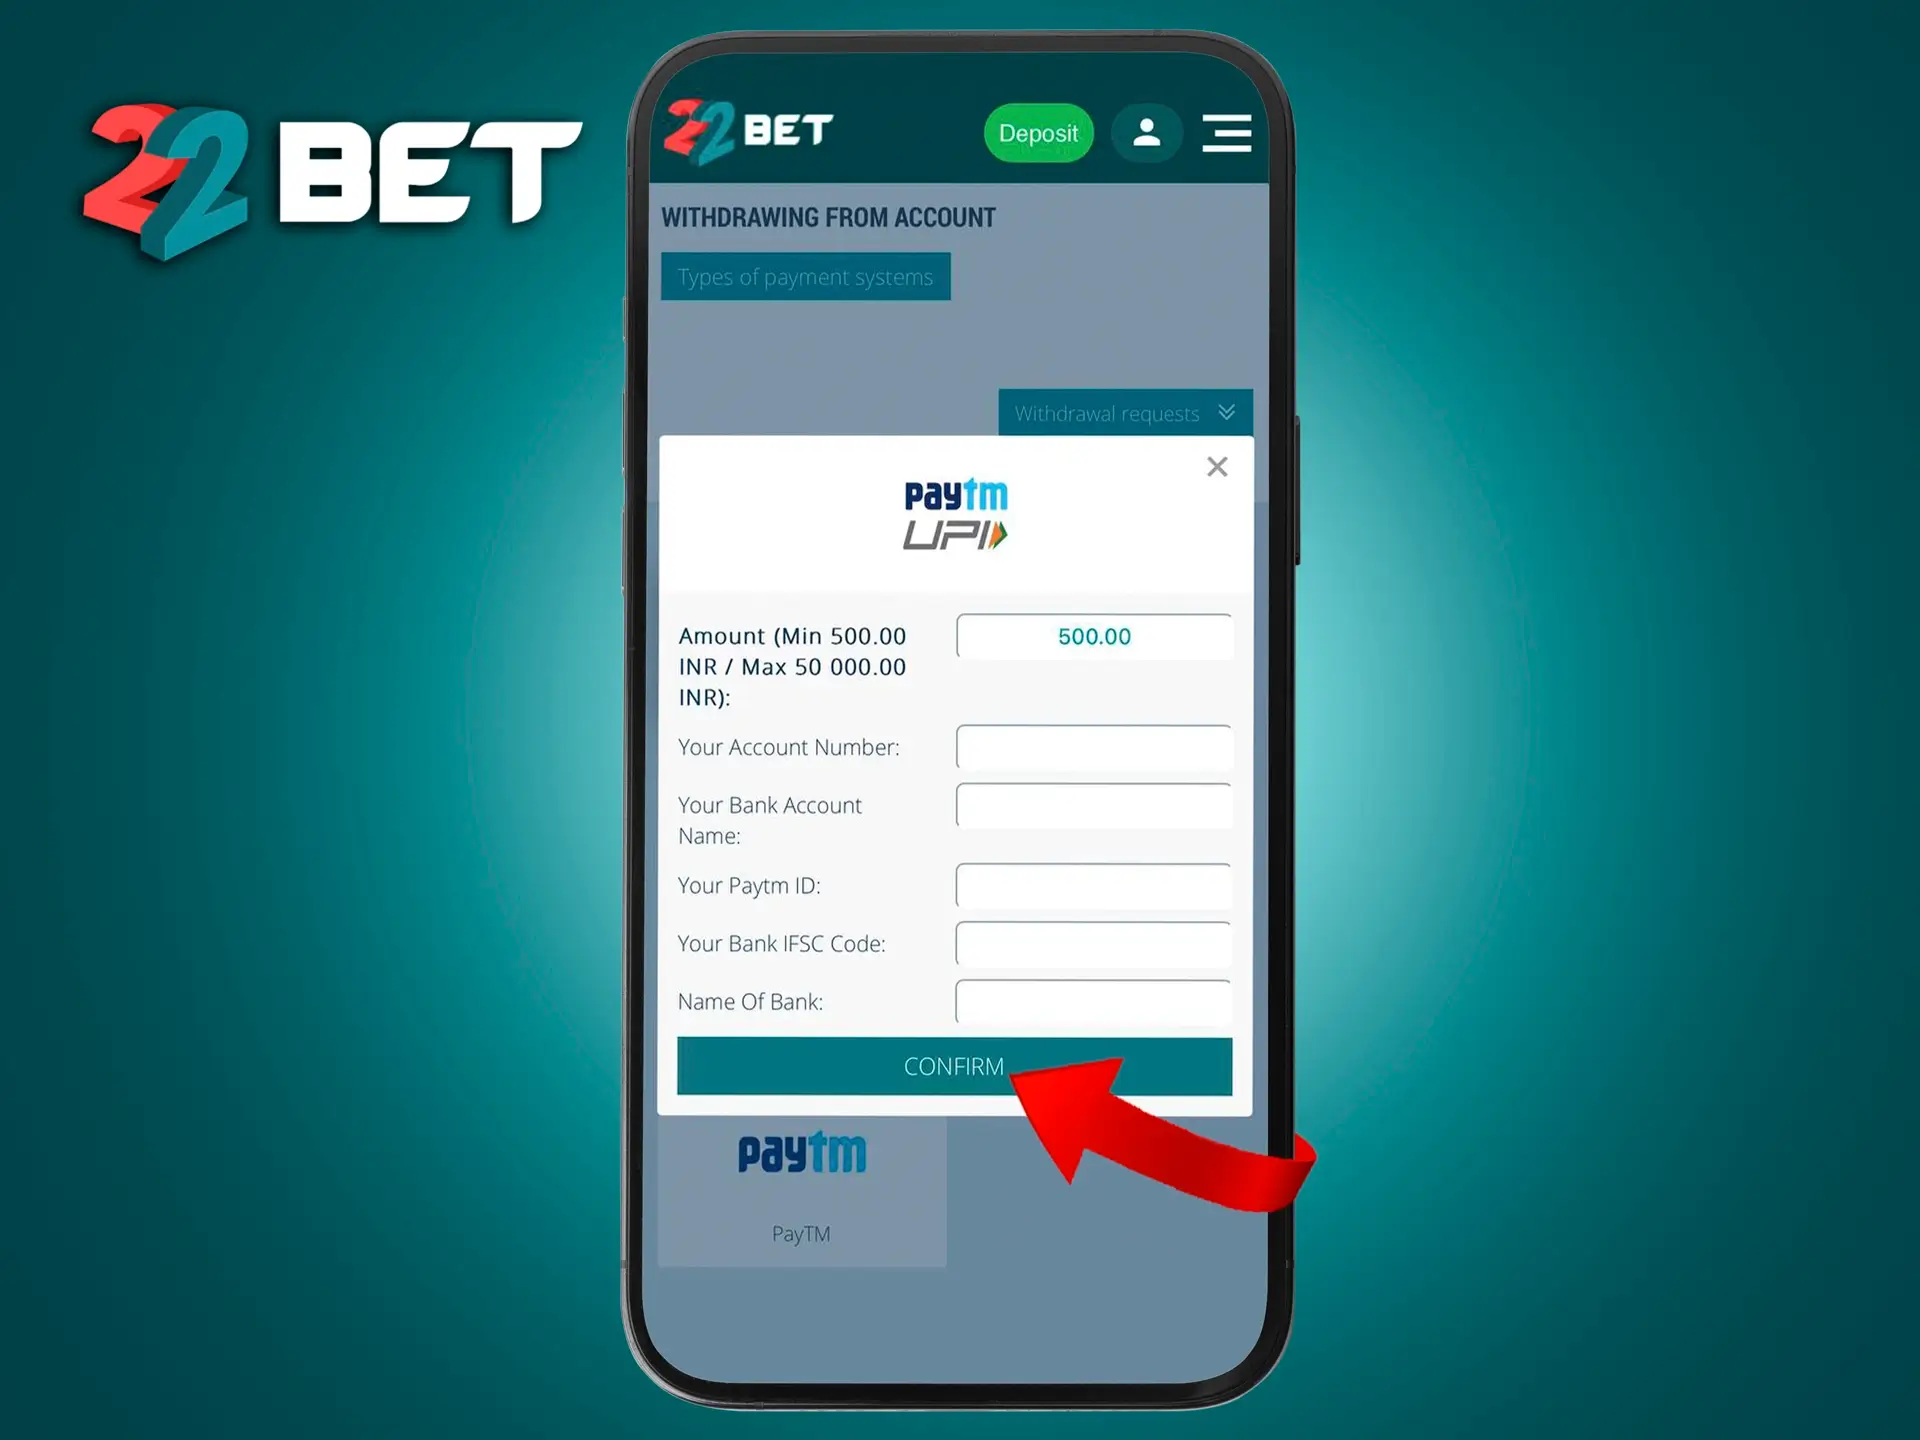 Enter the required amount and confirm the withdrawal from your personal 22Bet account.